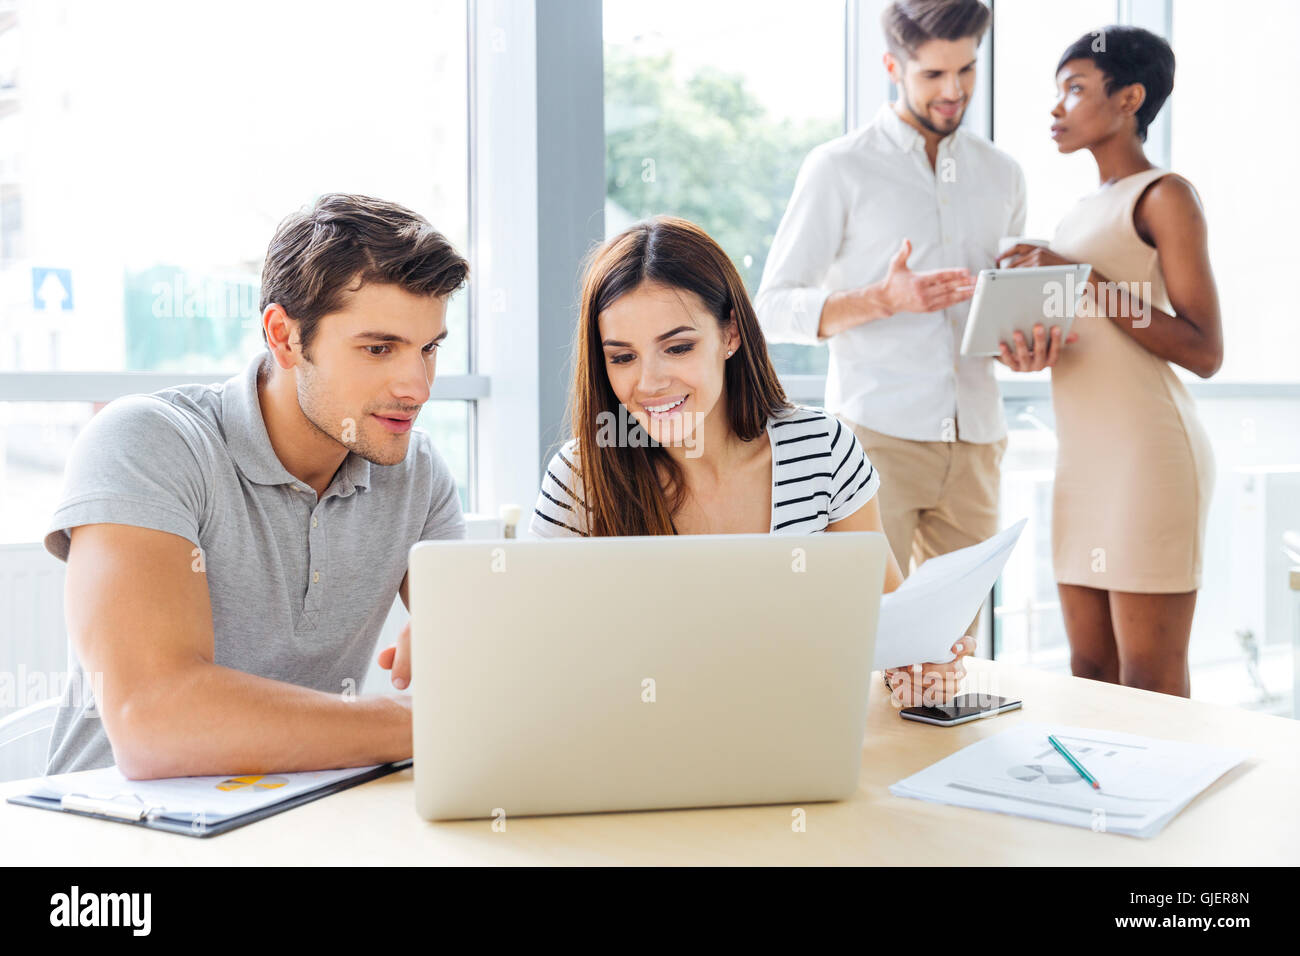 Group of smiling creative young business people working with laptop and tablet in office Stock Photo